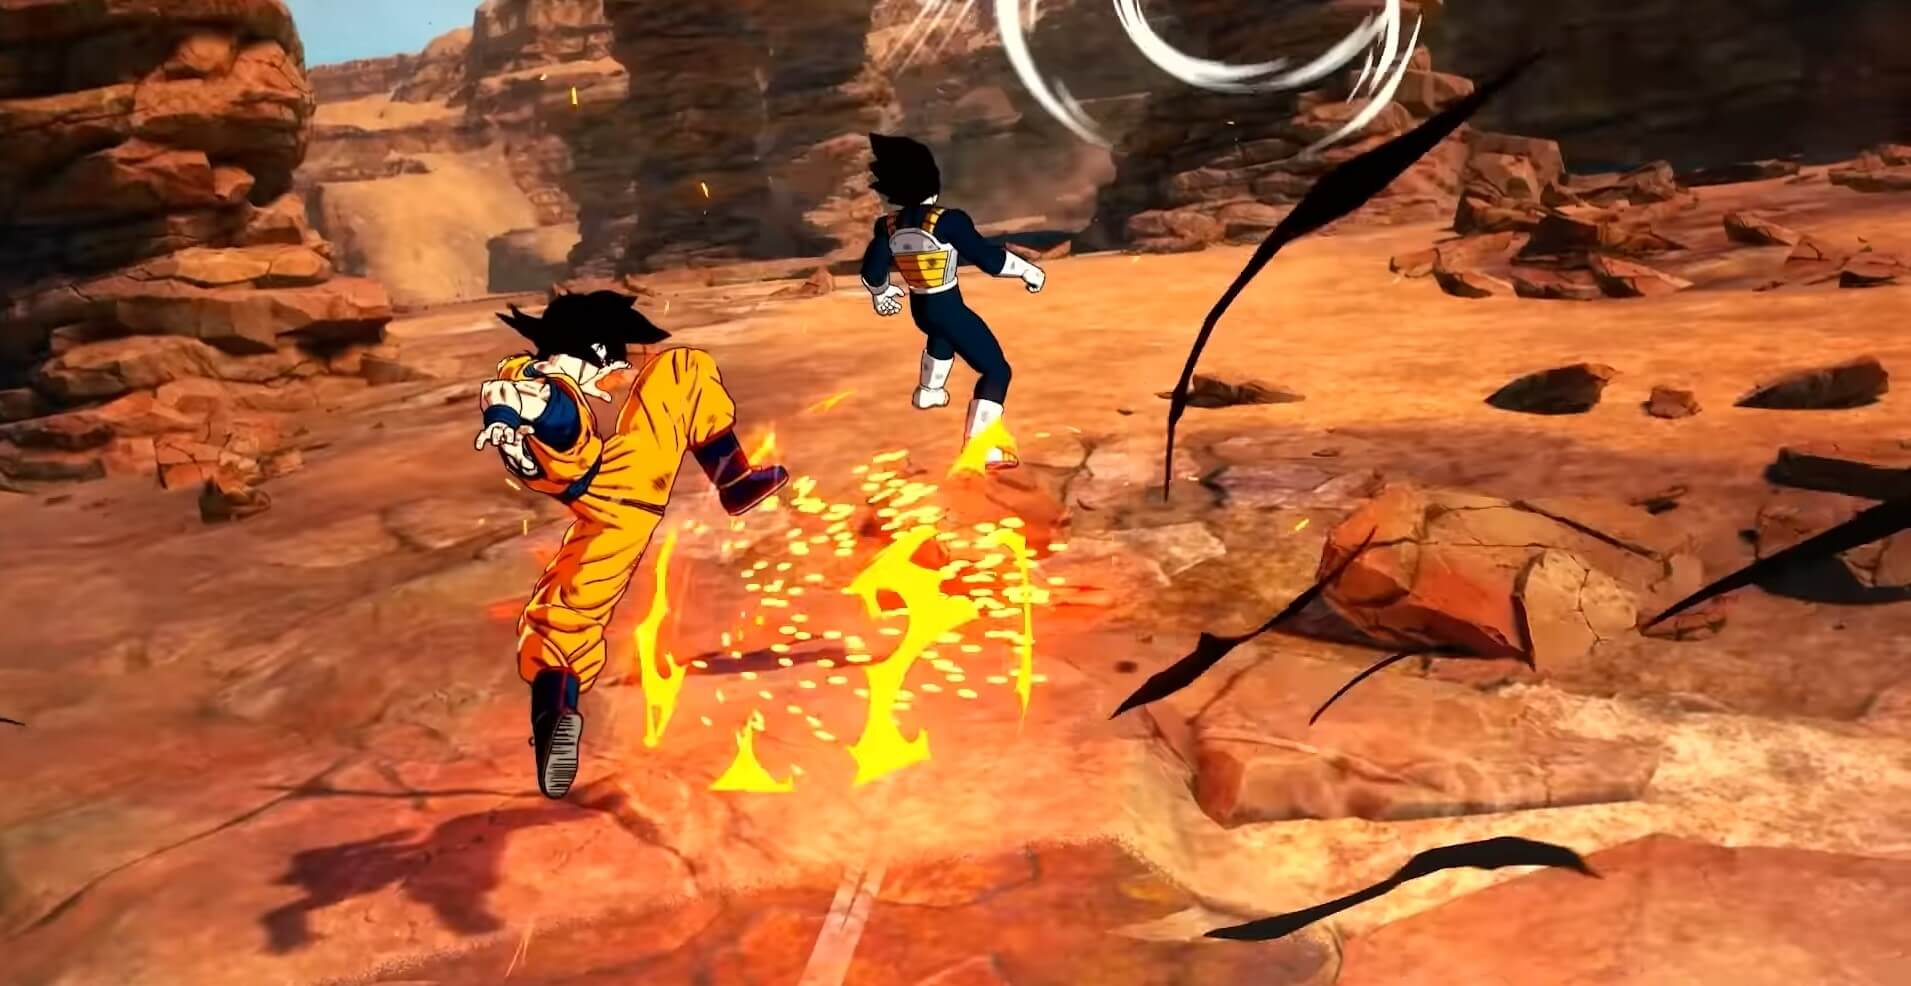 Aerial combos seem to be returning in Dragon Ball: Sparking Zero